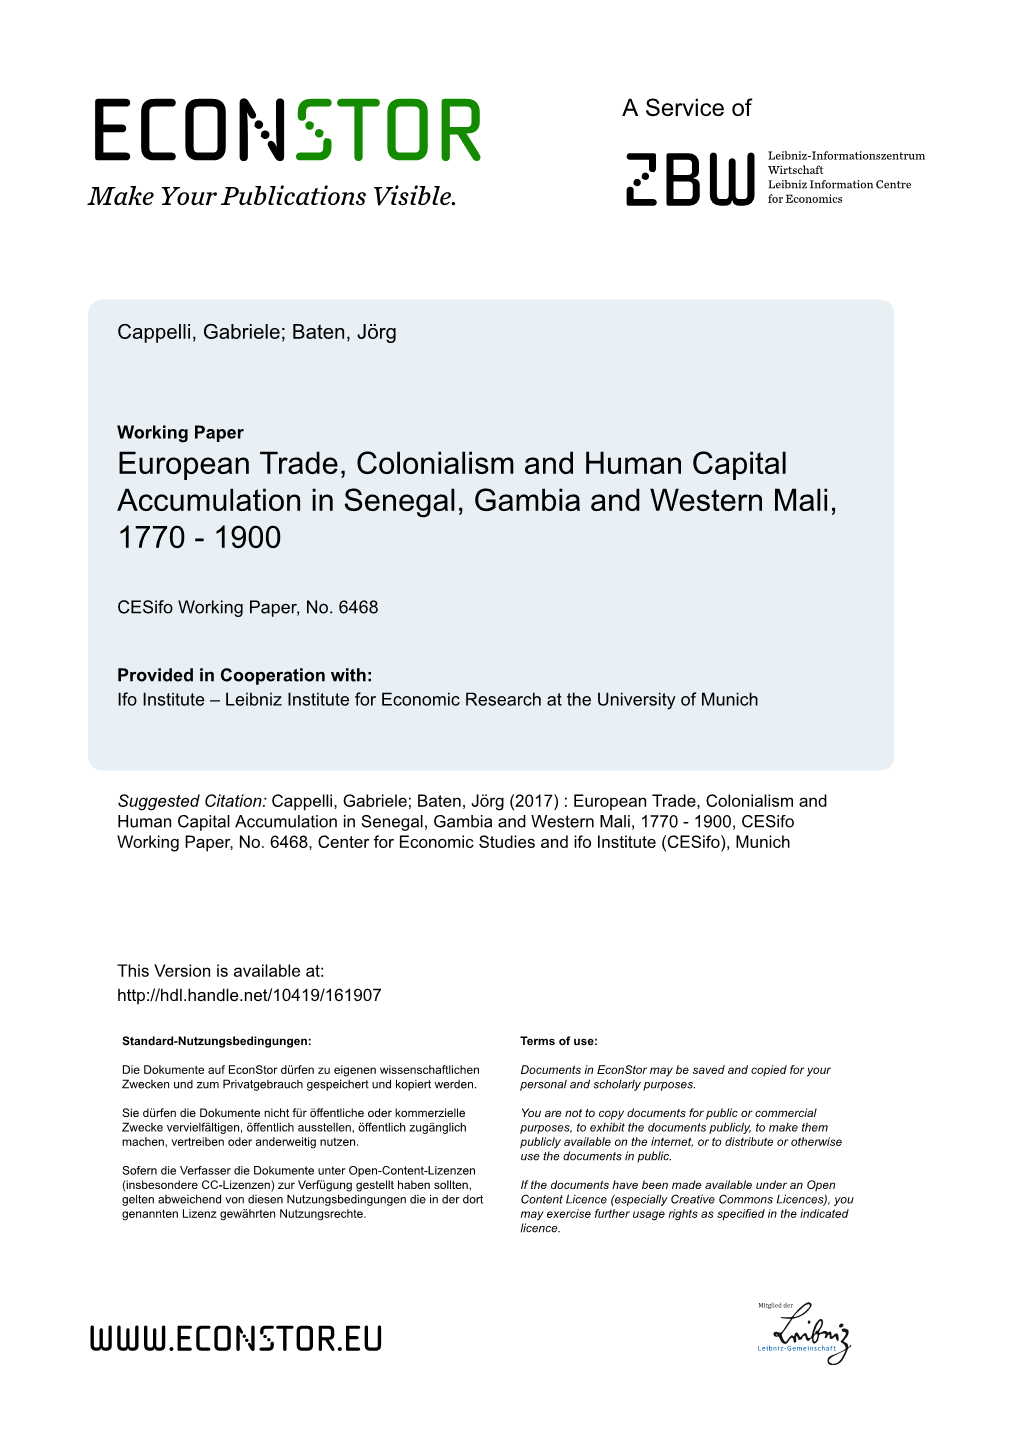 European Trade, Colonialism and Human Capital Accumulation in Senegal, Gambia and Western Mali, 1770 - 1900